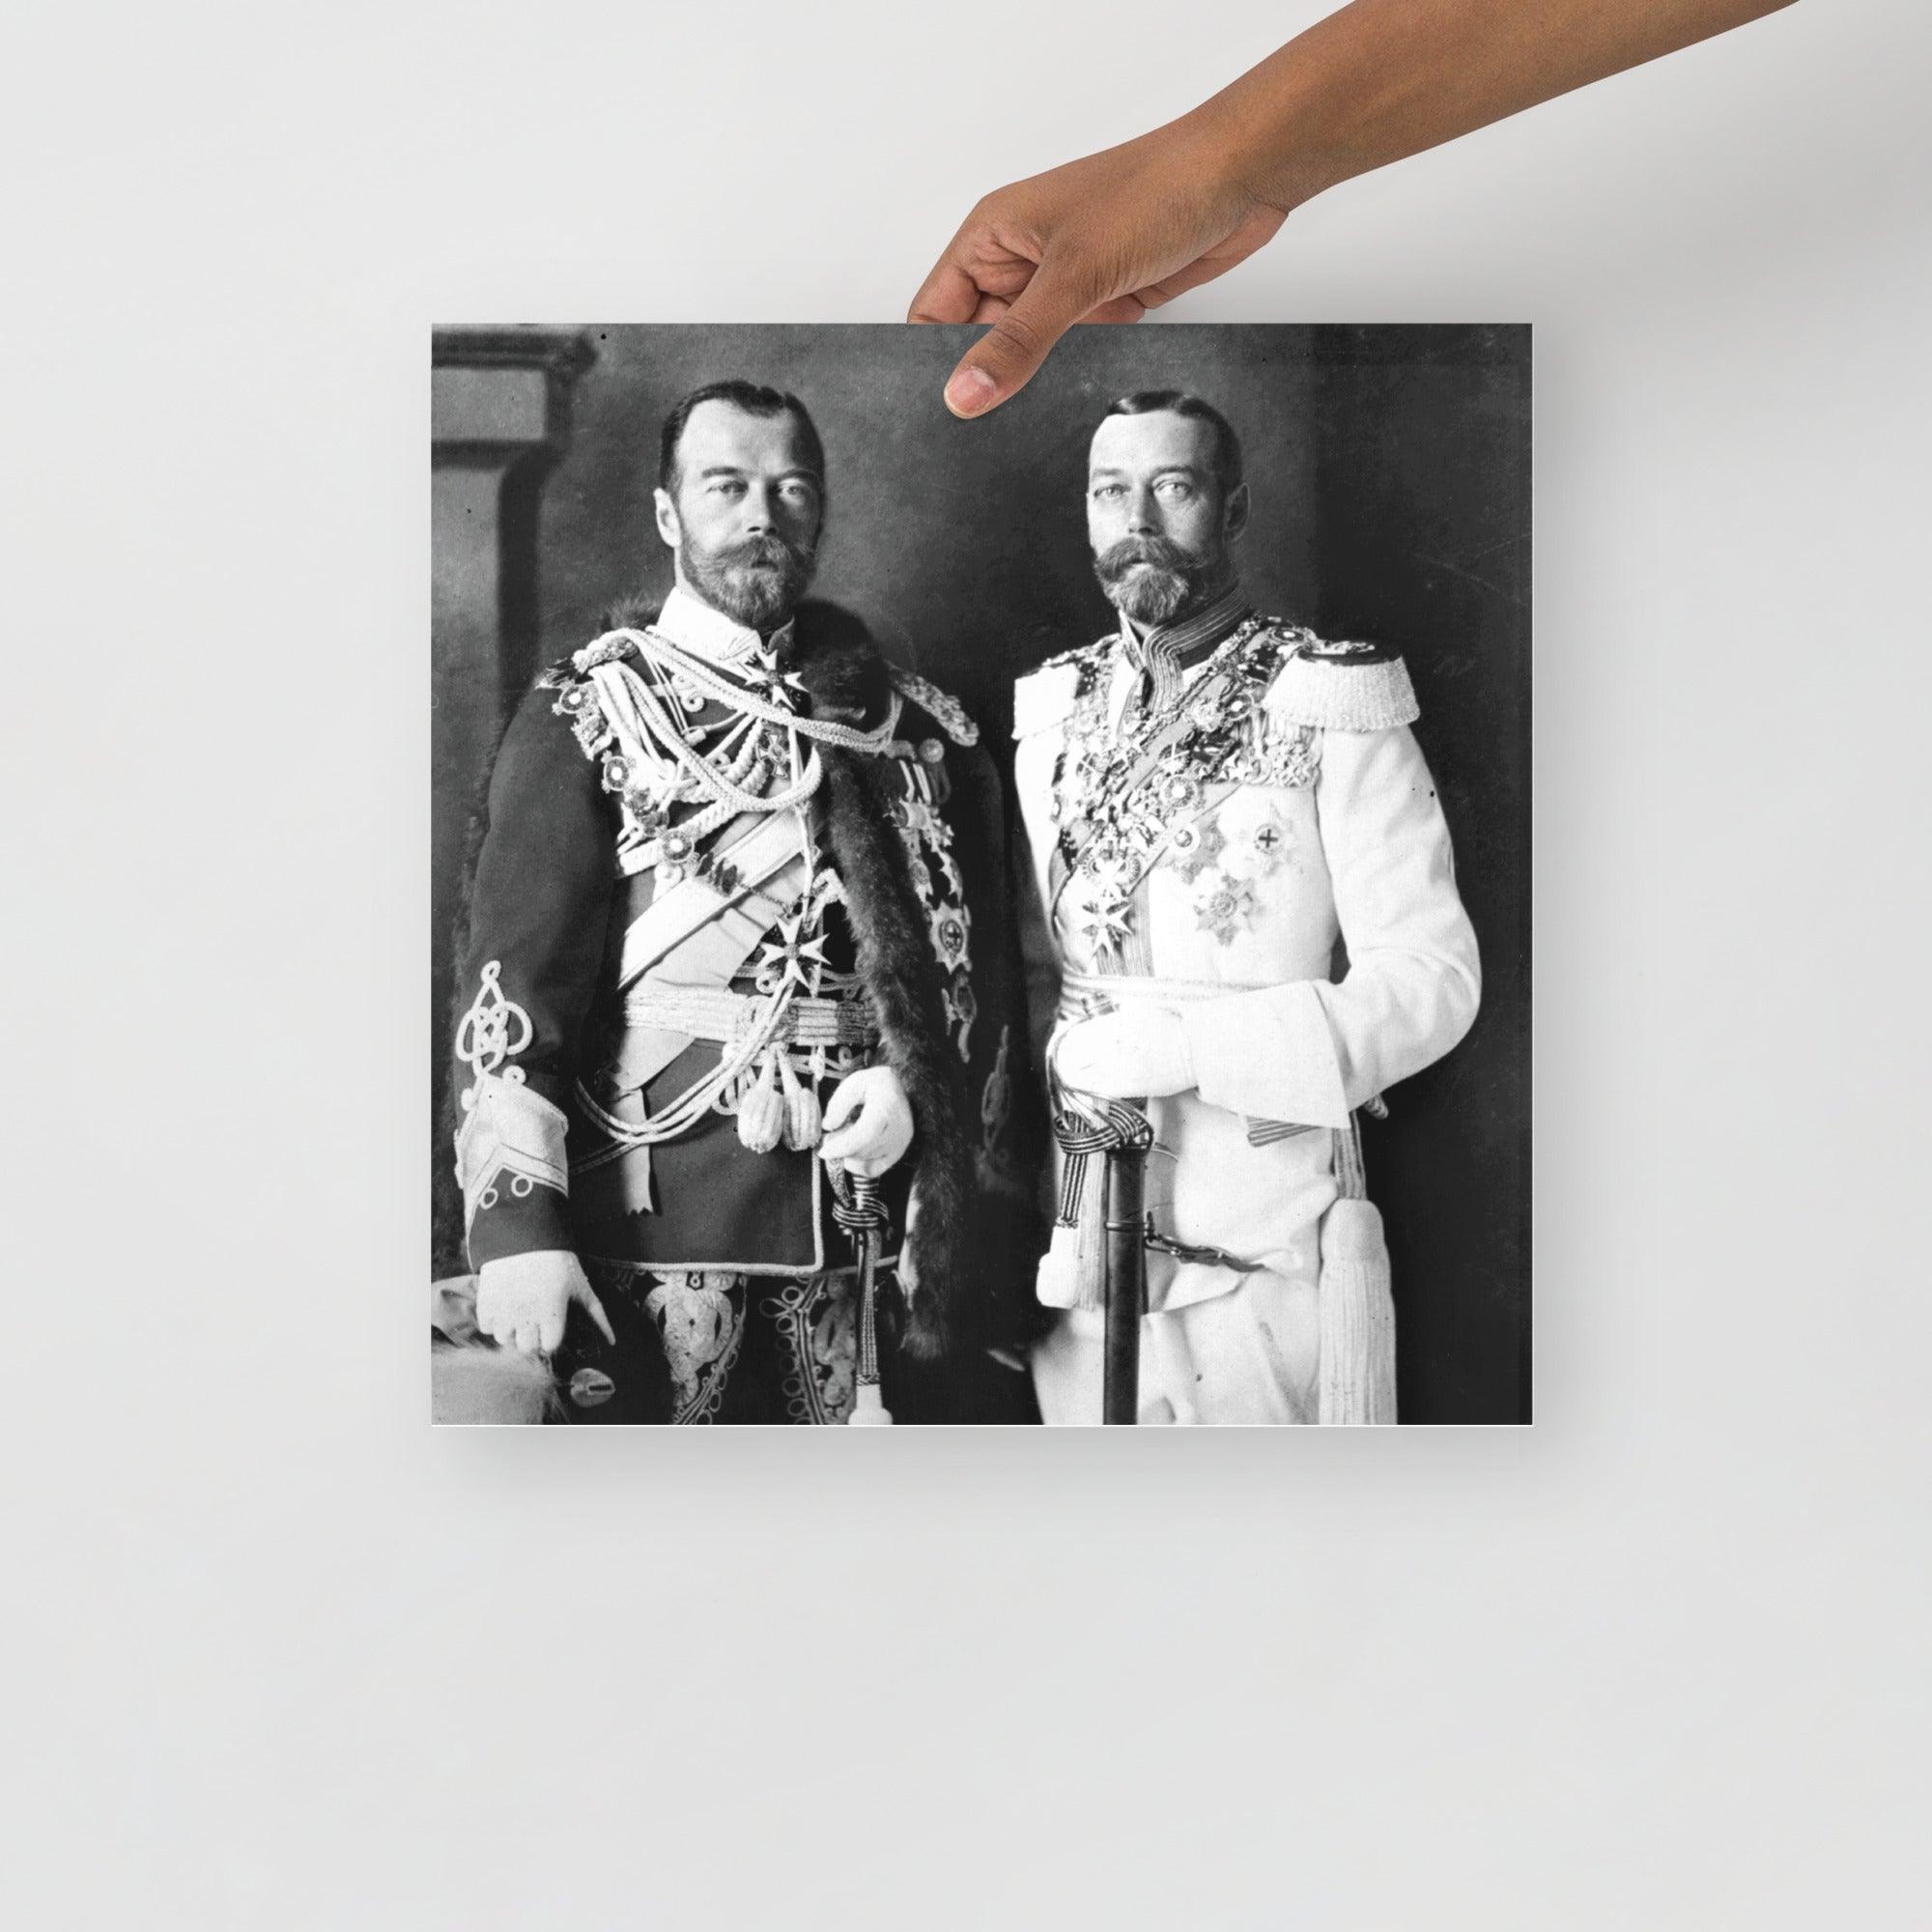 A Tsar Nicholas II & King George V poster on a plain backdrop in size 16x16”.